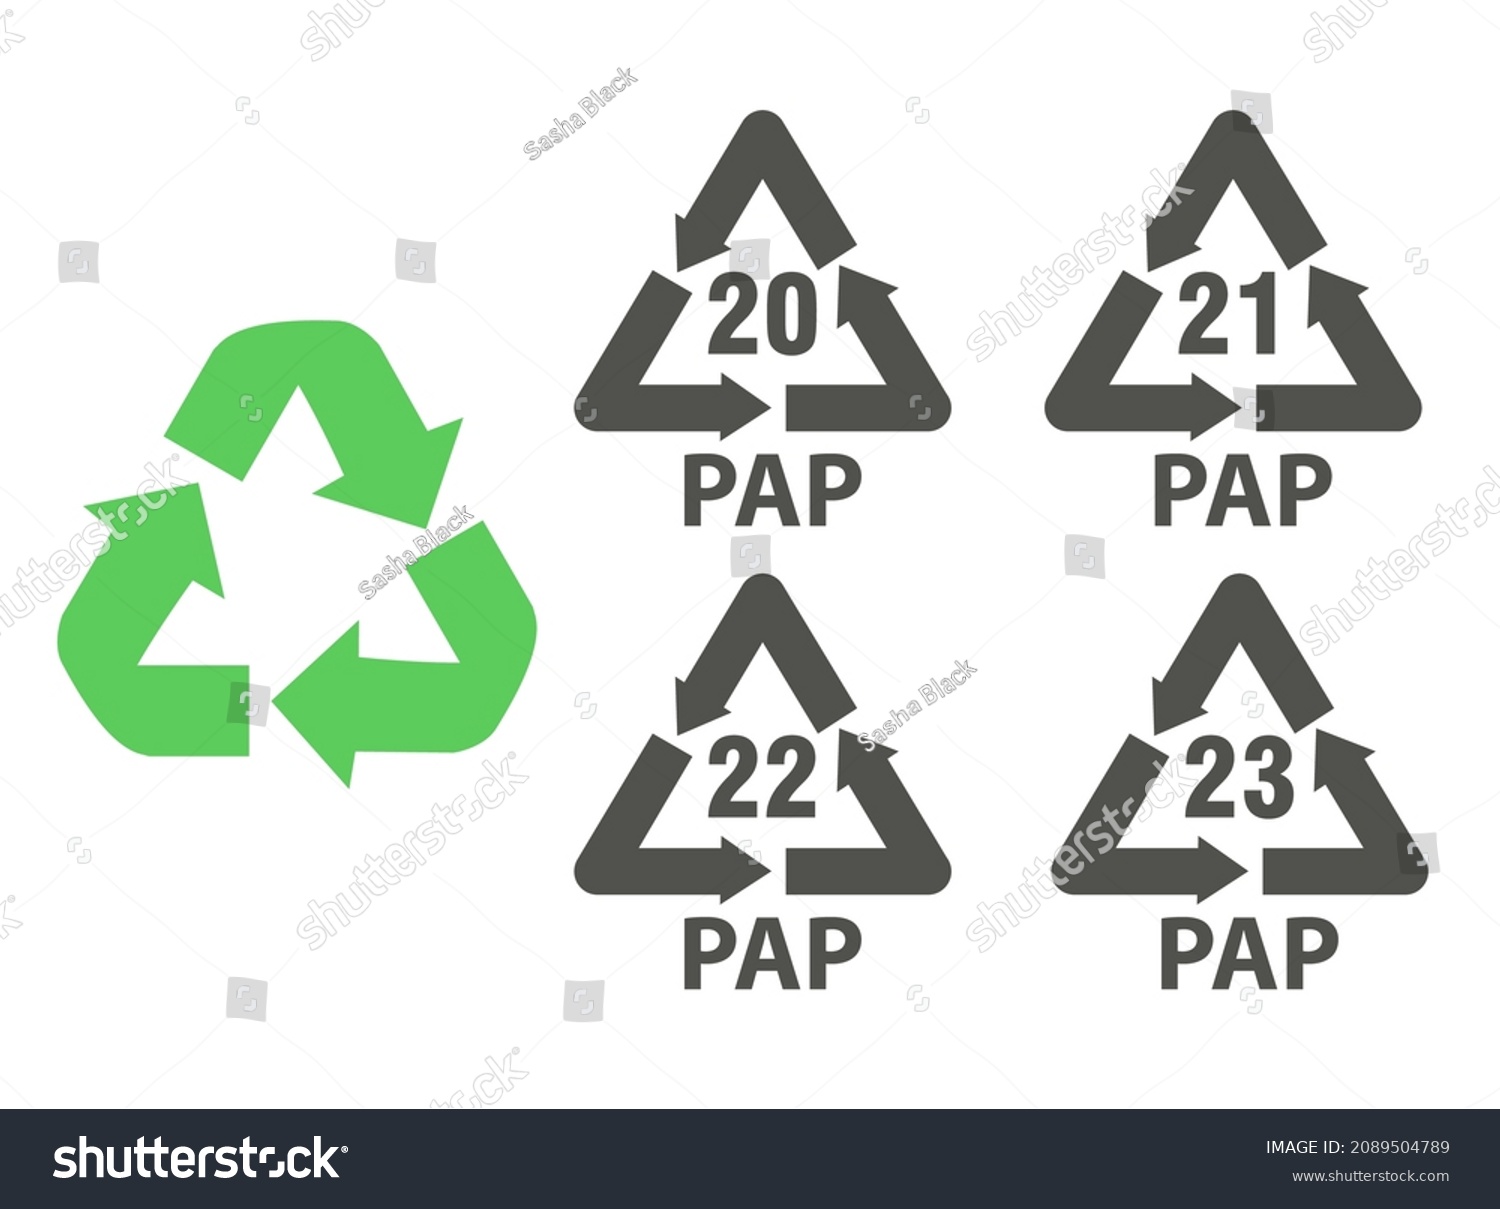 SVG of Paper recycling codes. Identification and packaging signs and symbols. Waste sorting icons. Vector illustration. svg